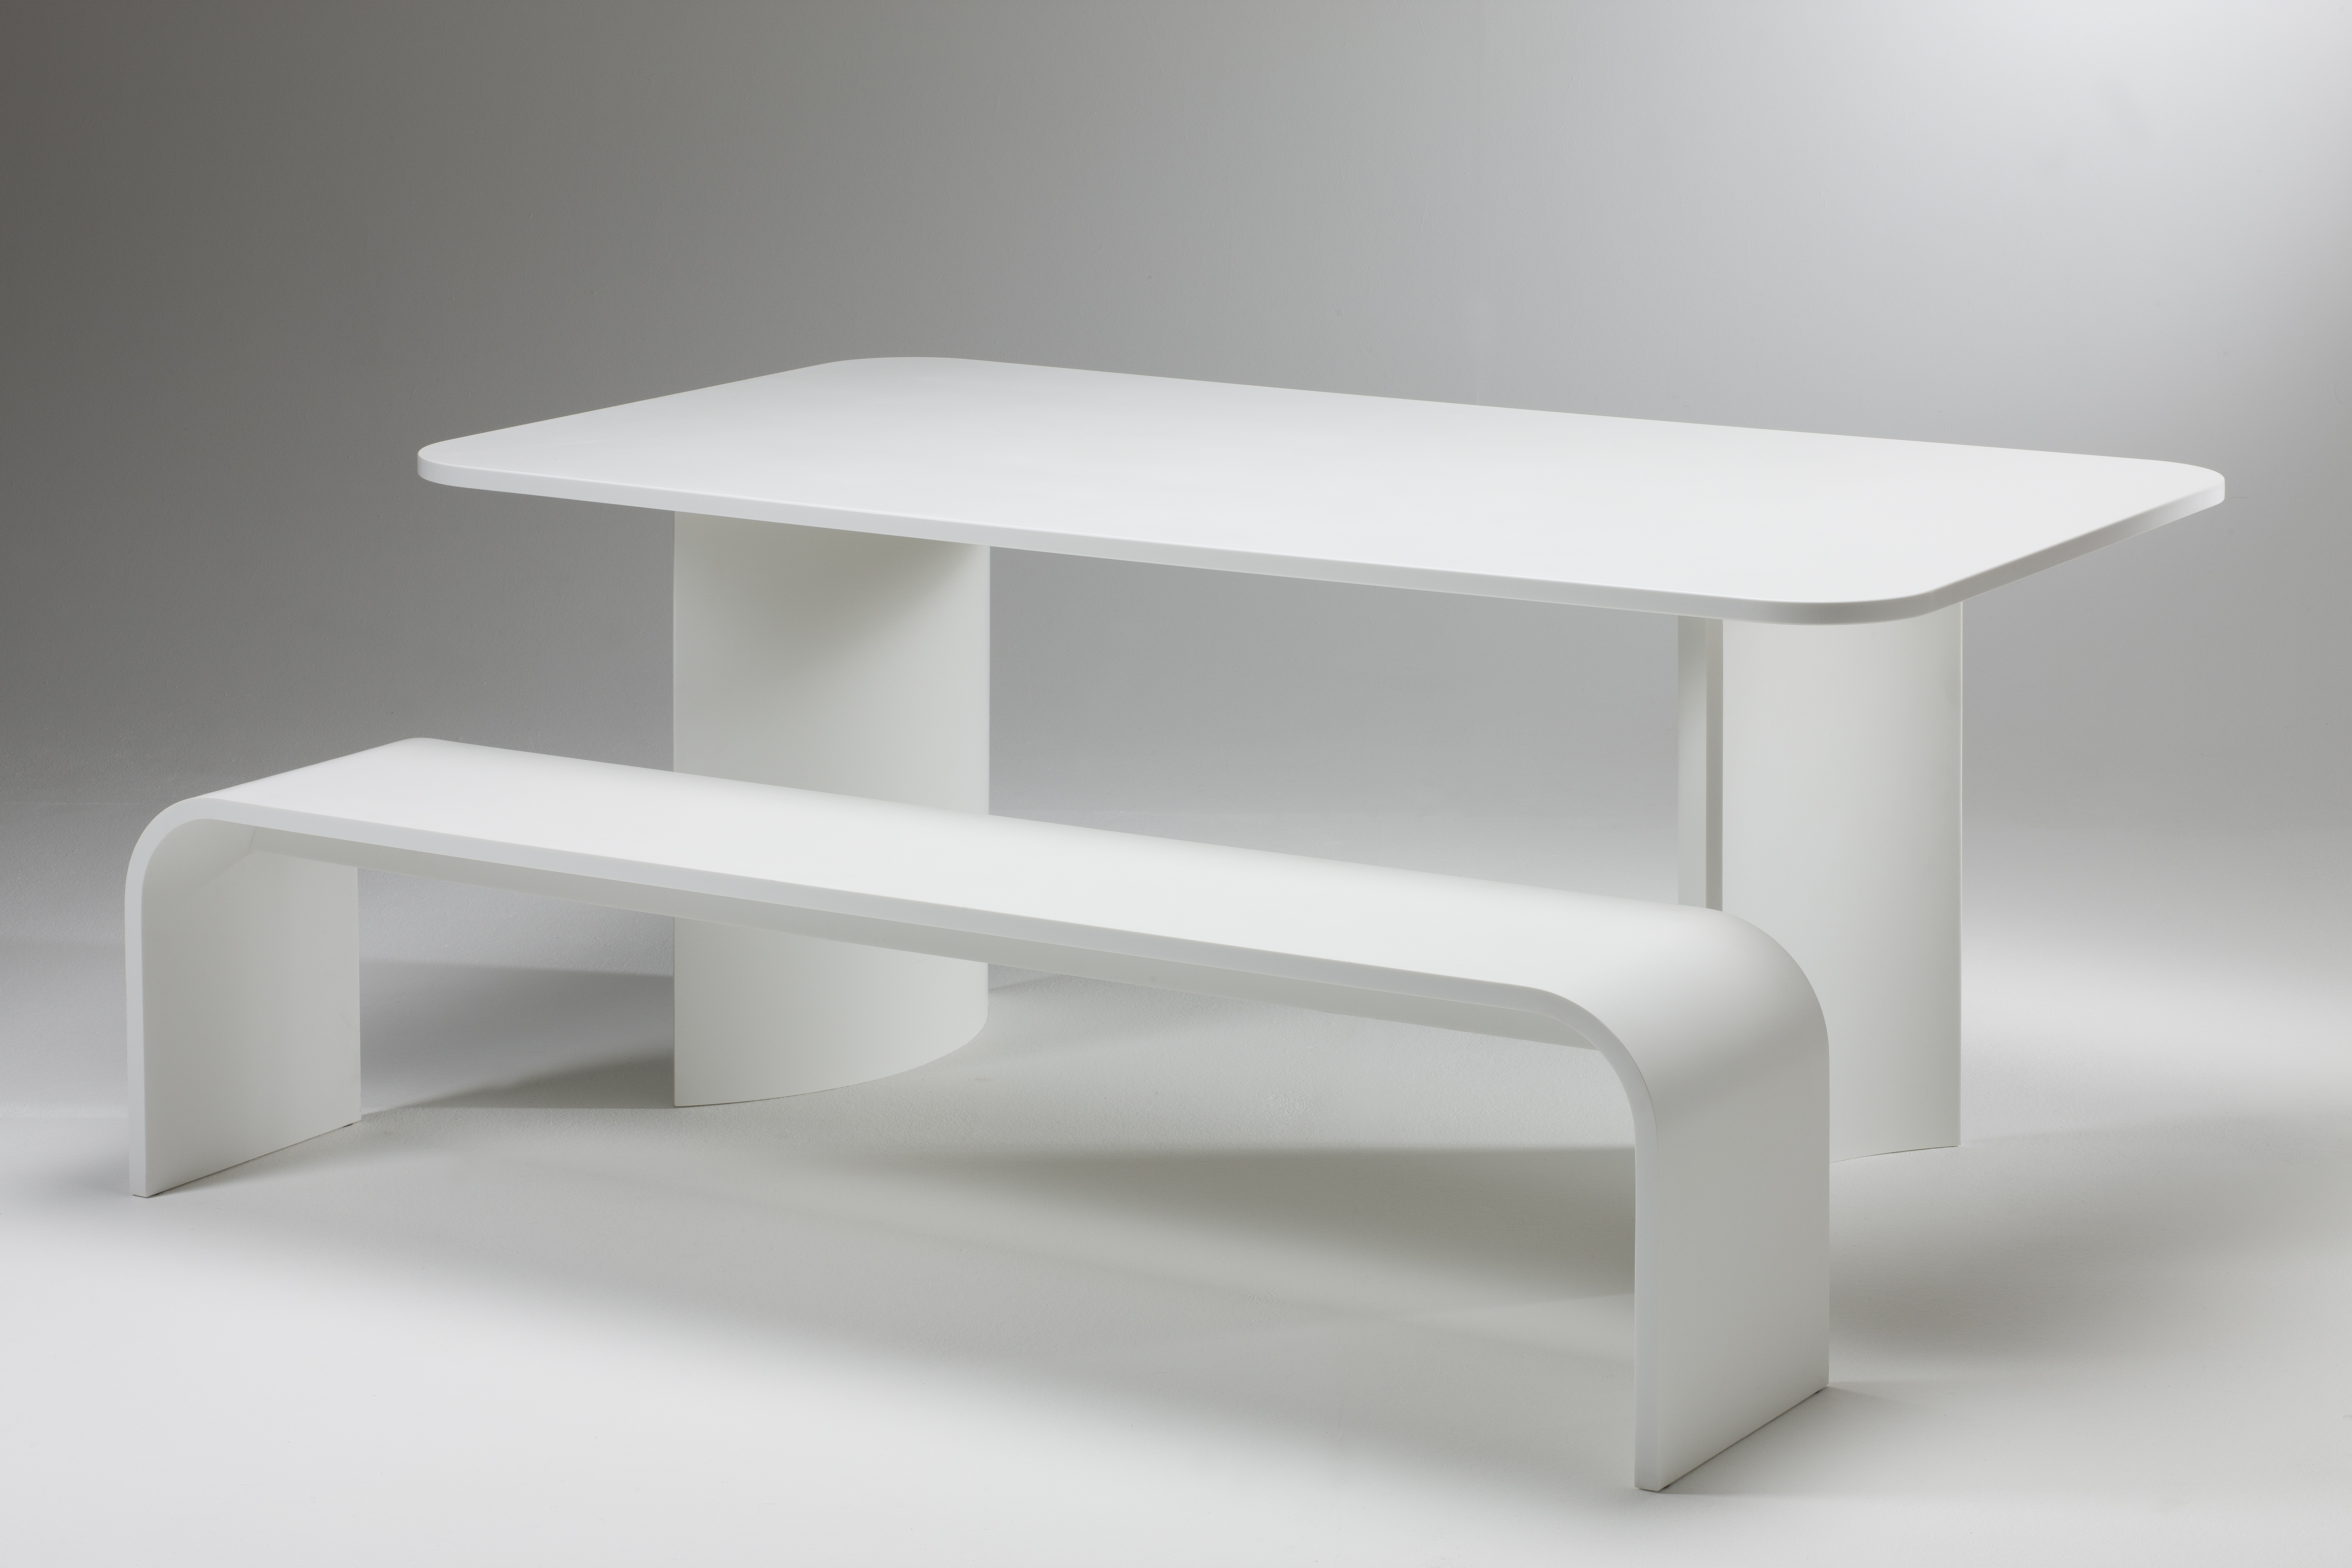 Gravitate, 'Arc' Corian Dining table and bench.